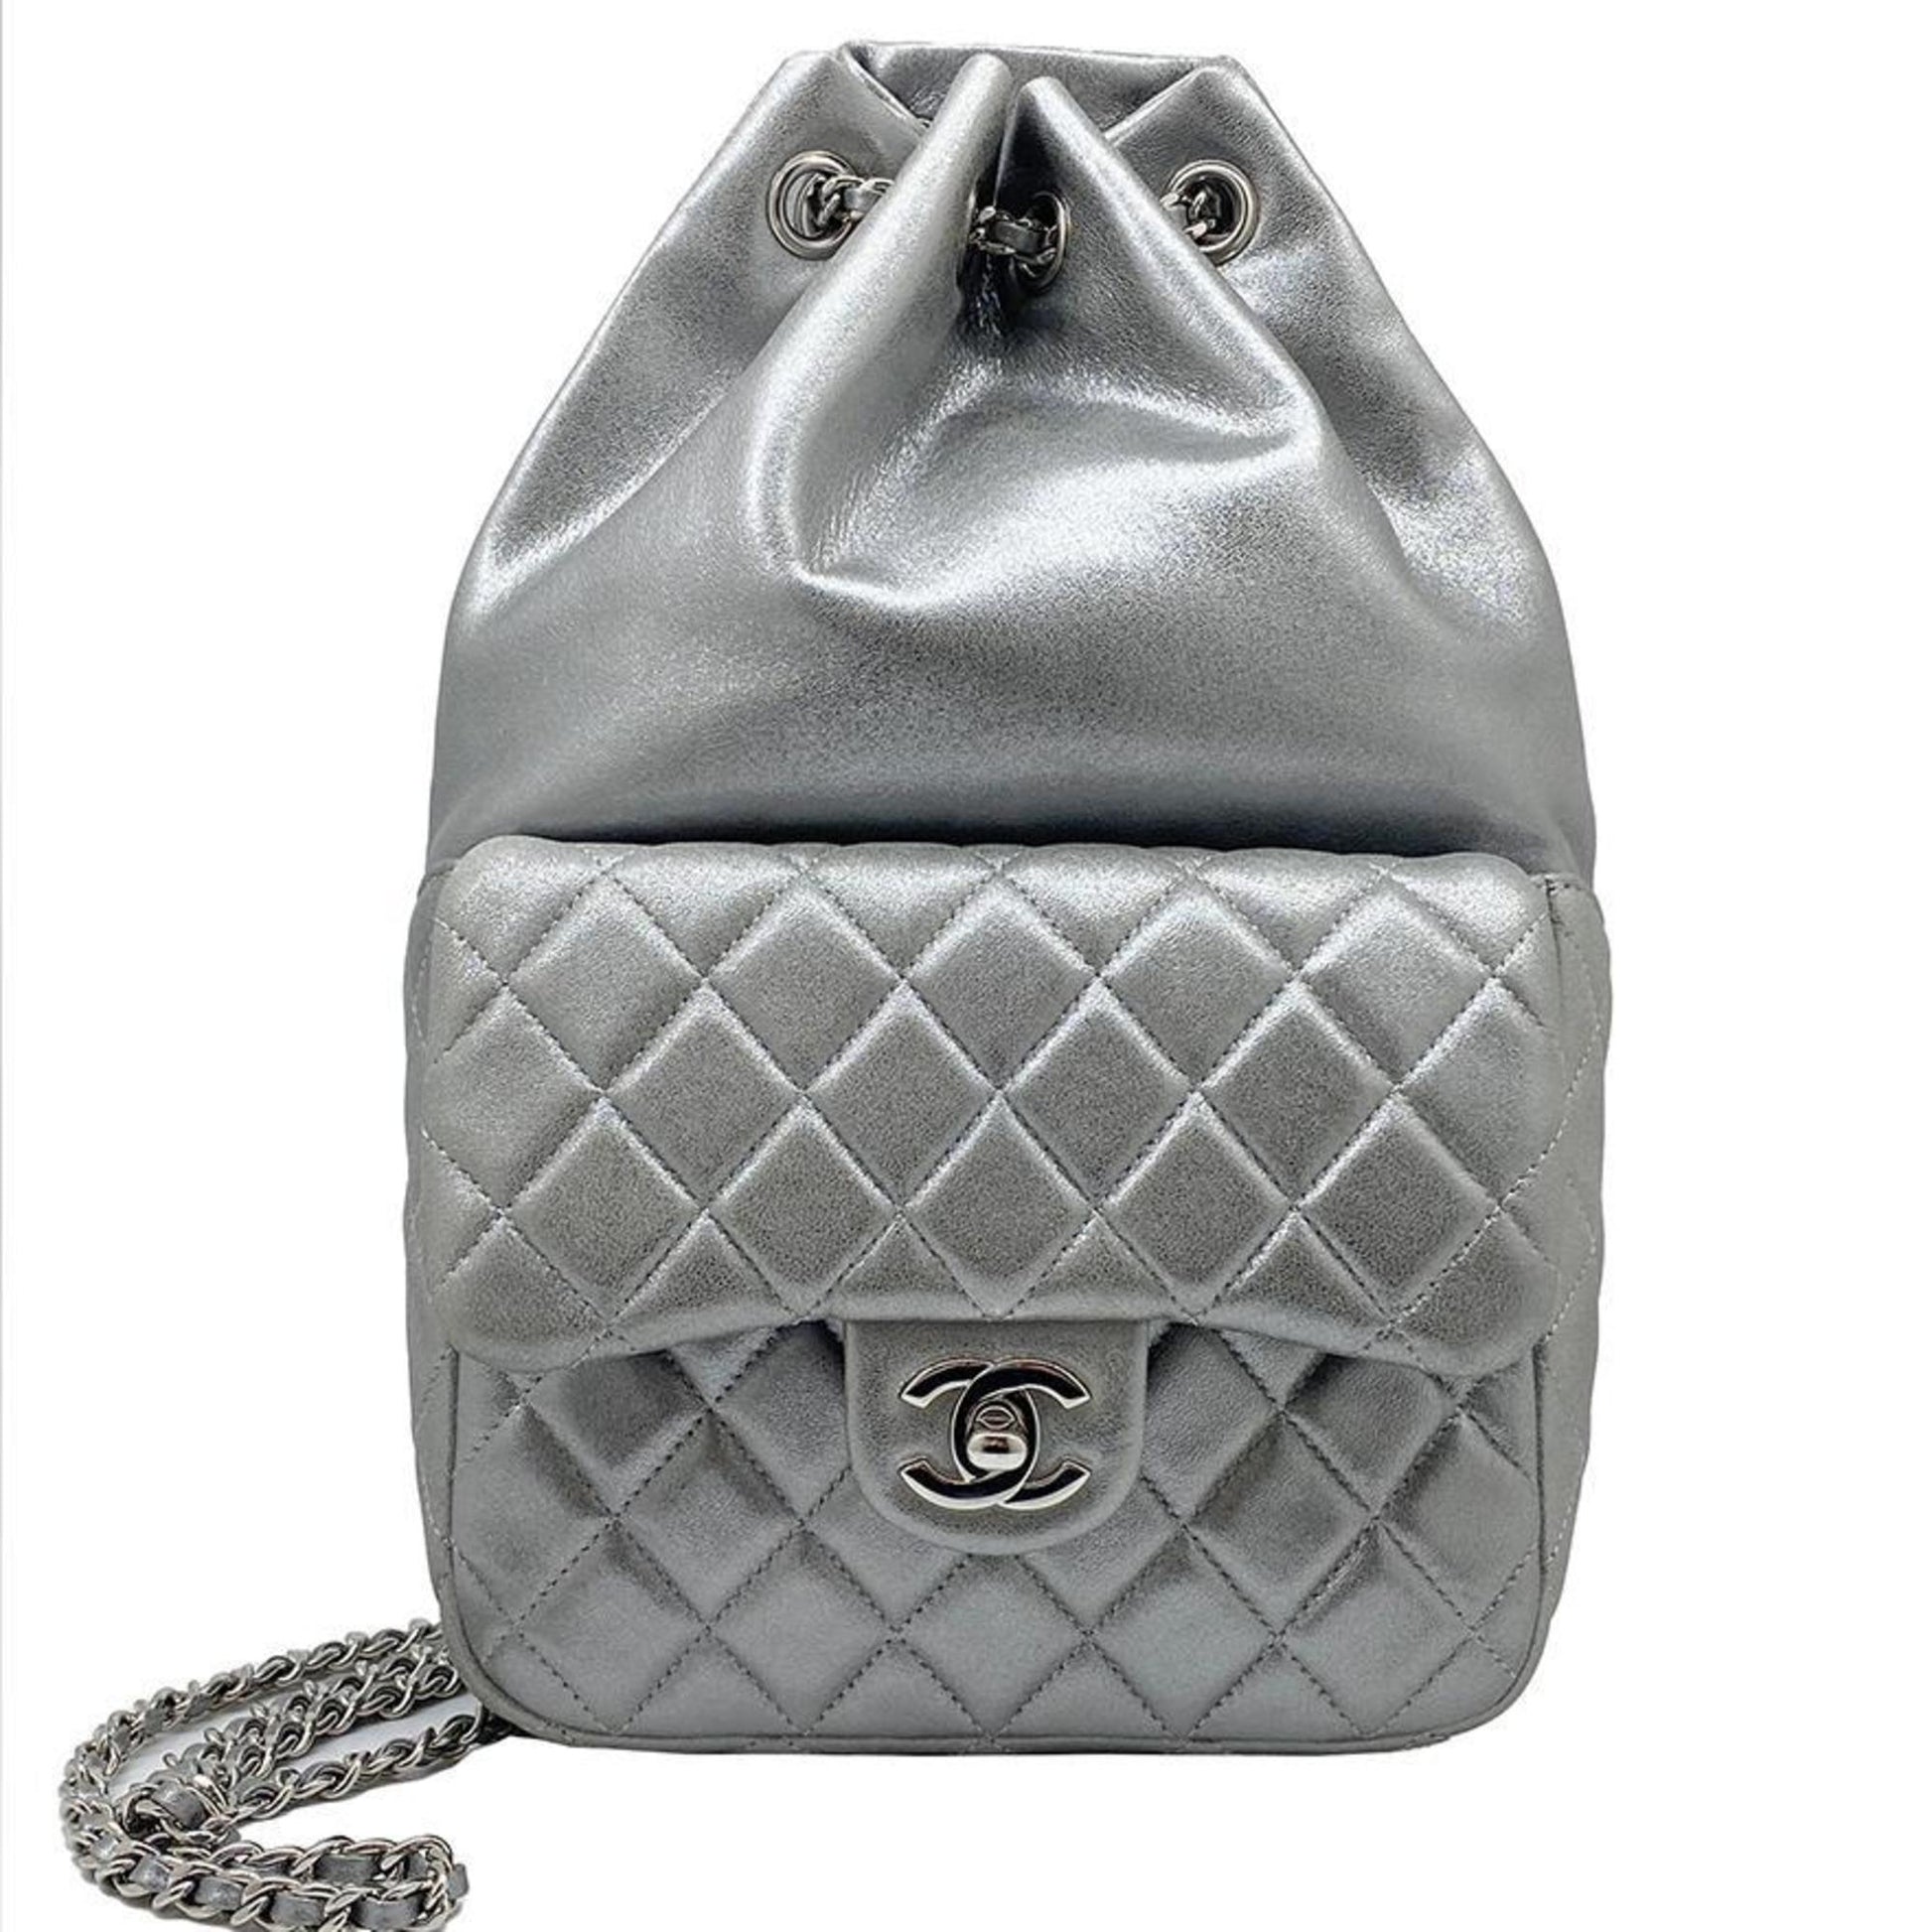 Chanel matelasse rucksack backpack purse type vintage leather silver A